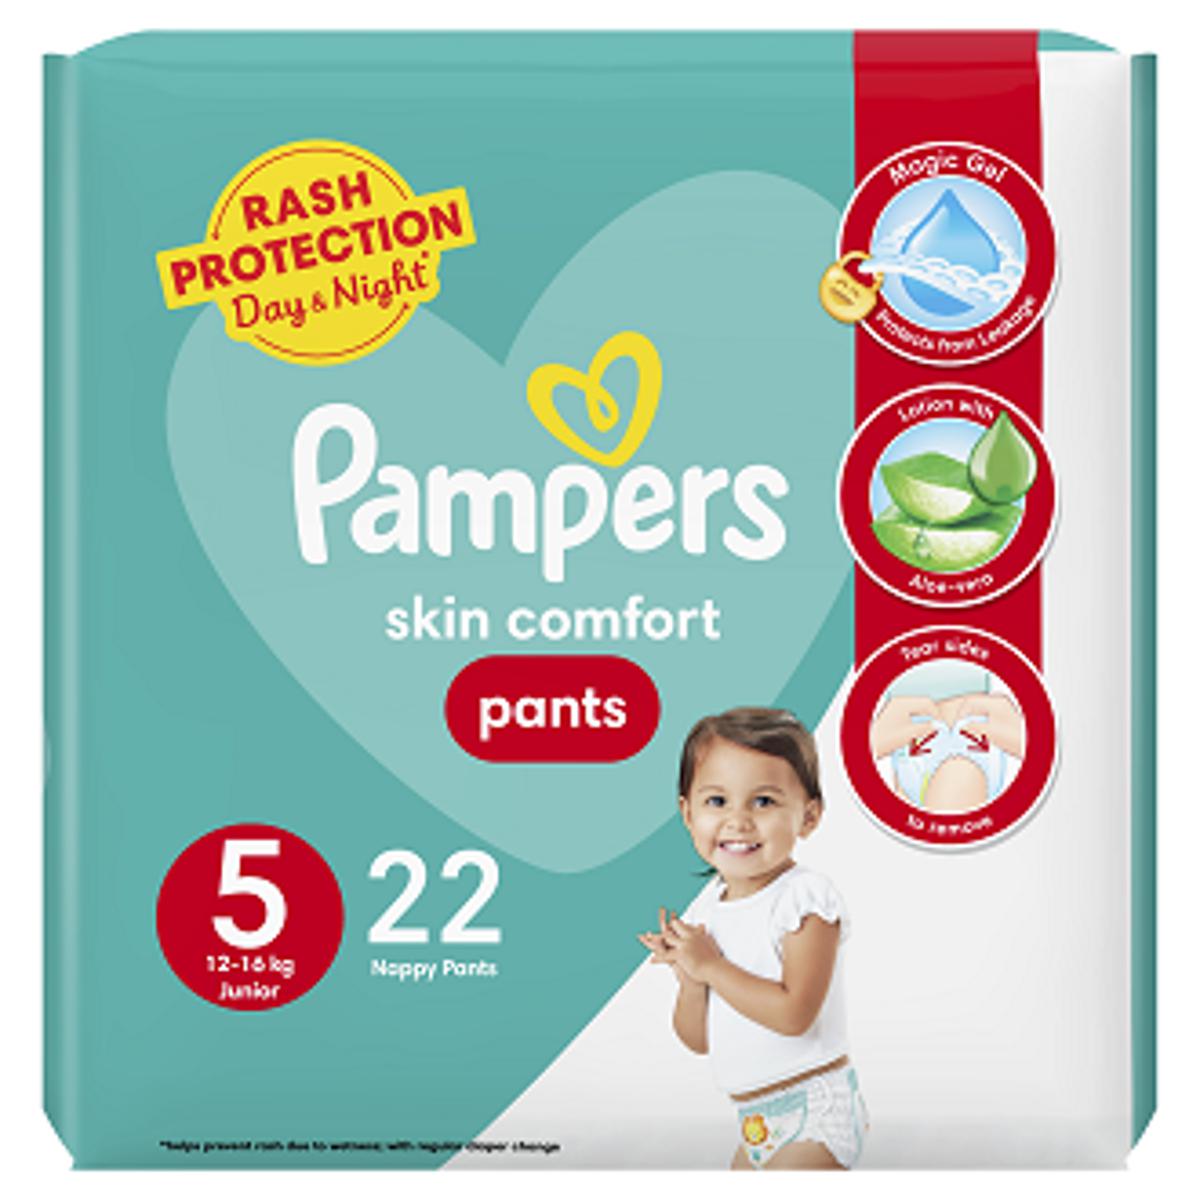 Pampers Pants Baby Diapers (Size 5 Junior 22 Pcs)